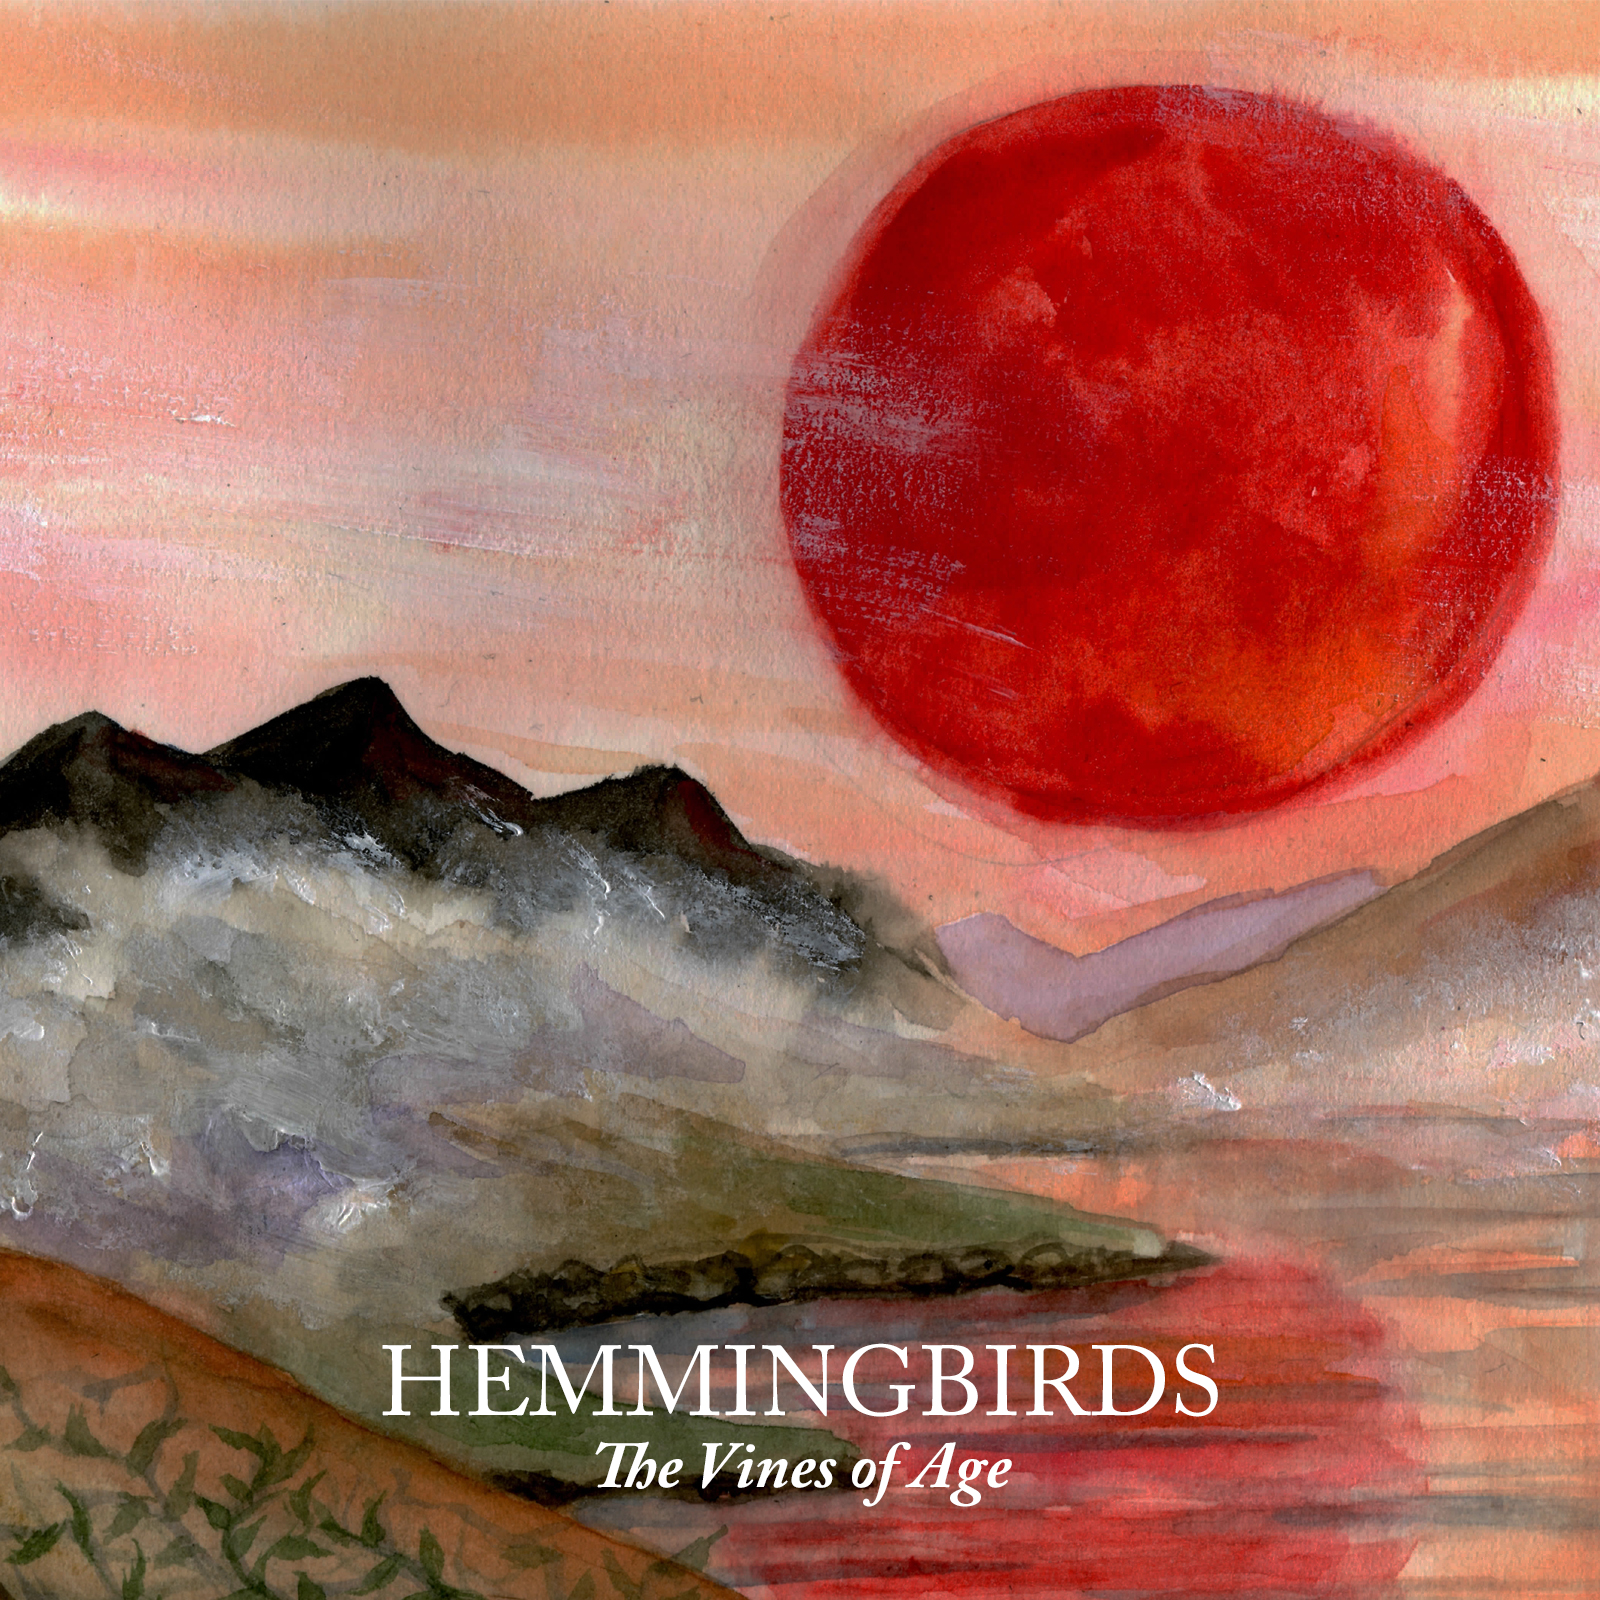 Hemmingbirds The Vines of Age Available Now